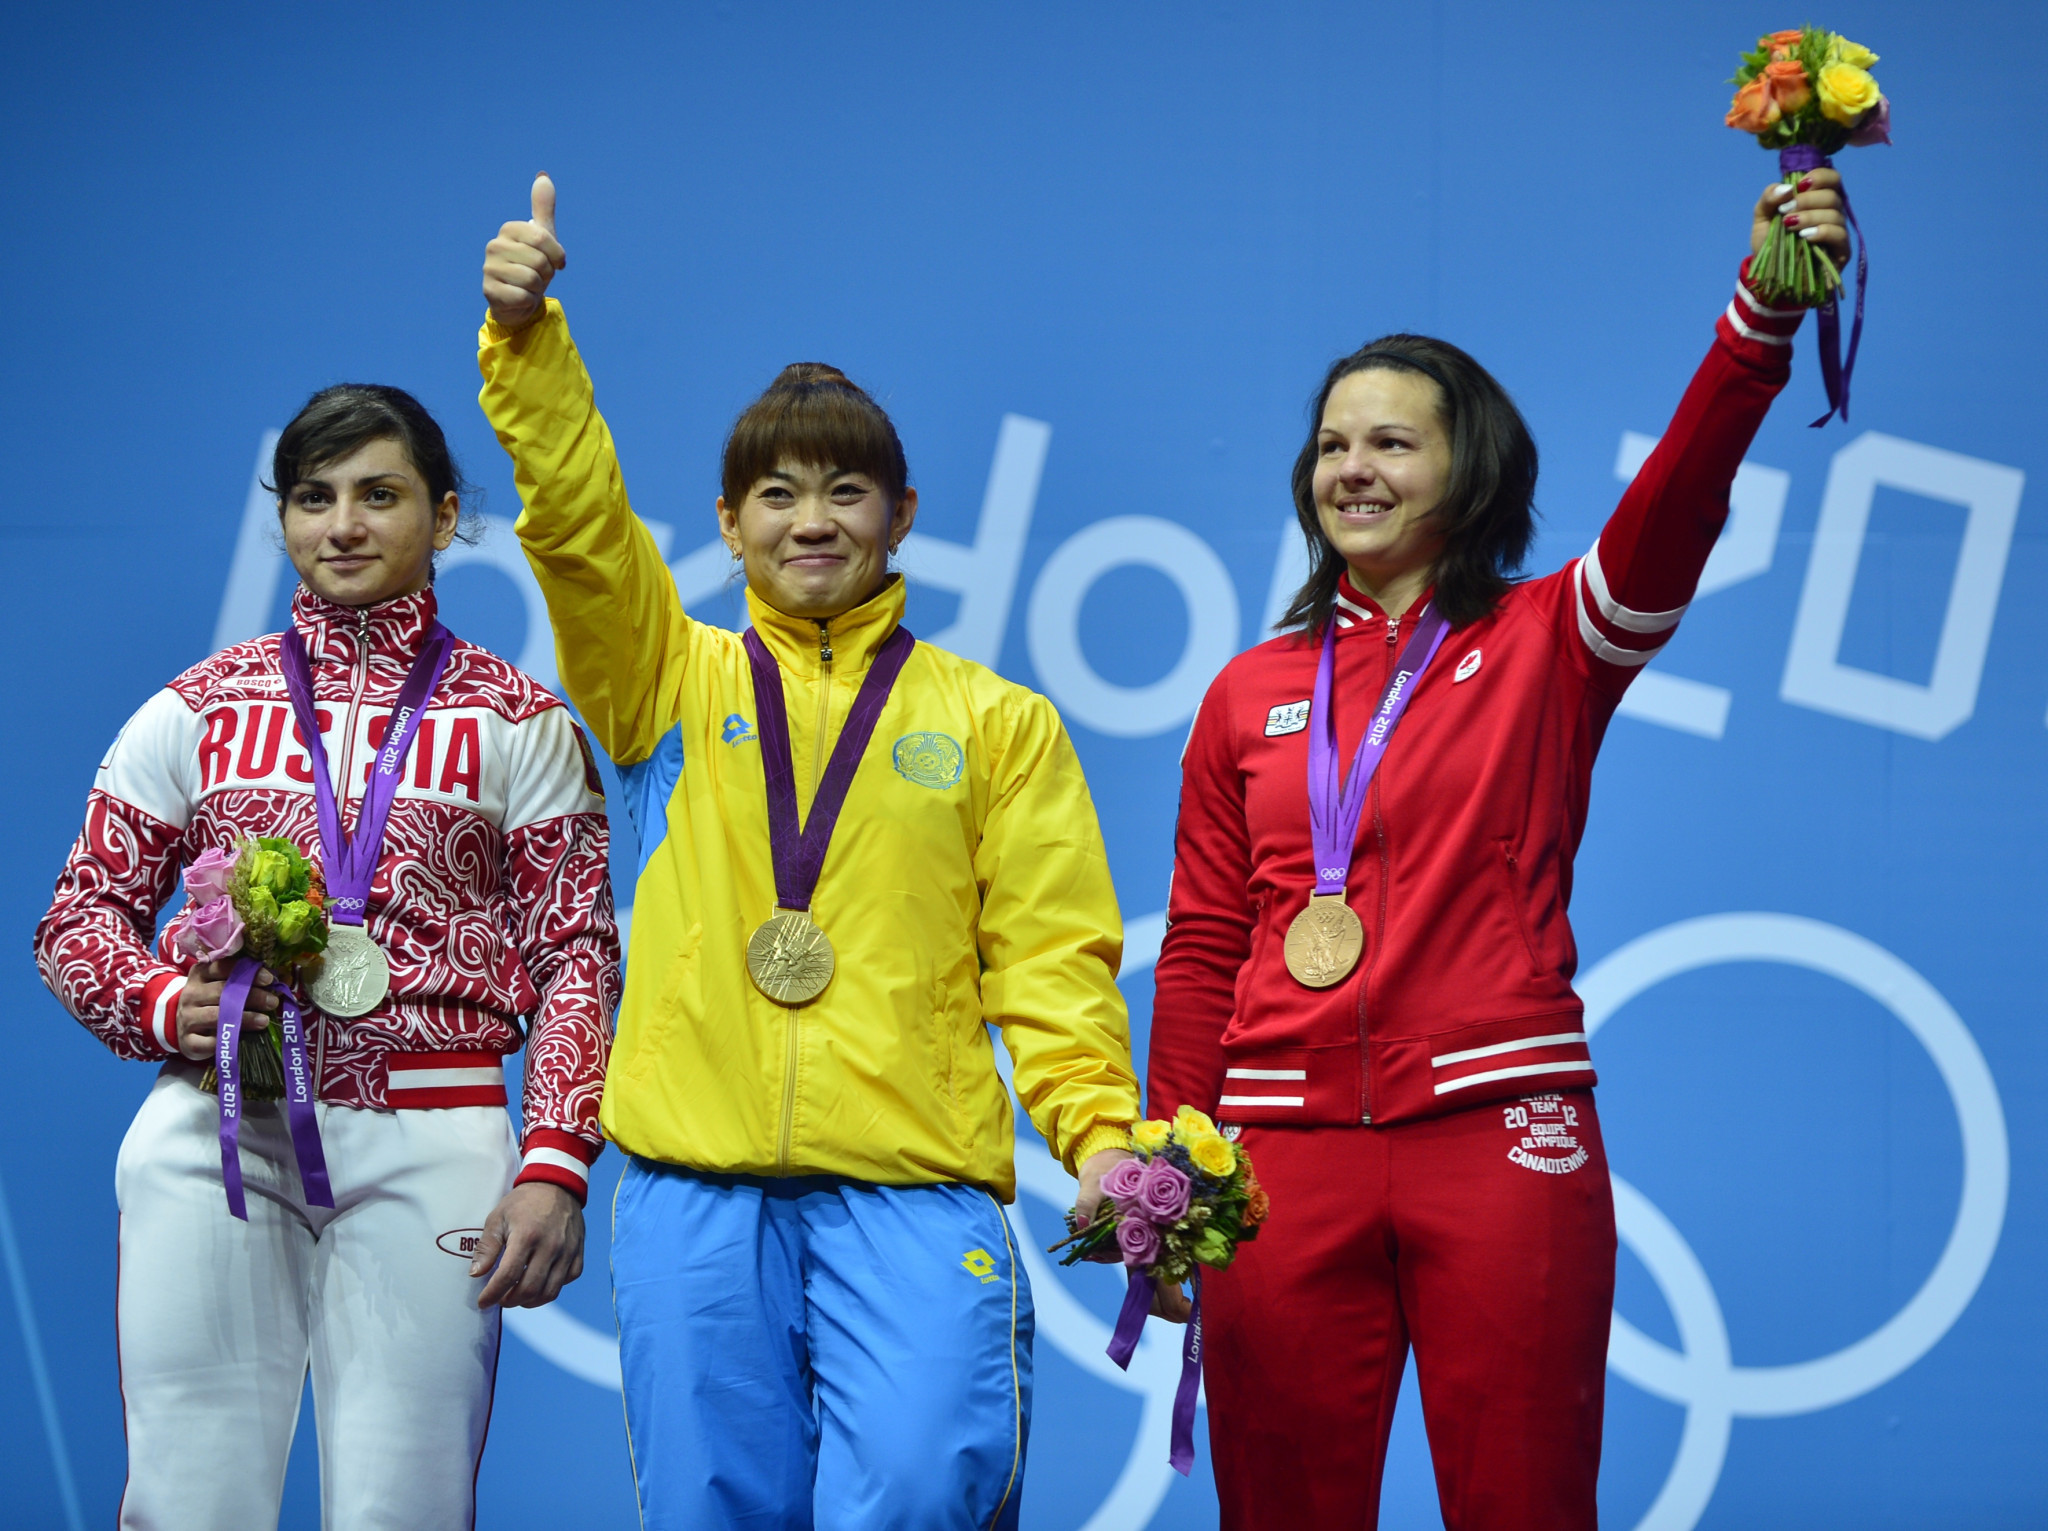 Christine Girard, right, originally finished behind Kazakhstan’s Maiya Maneza, centre, and Russia’s Svetlana Tsarukayeva, left, at London 2012, but they were both disqualified for doping ©Getty Images